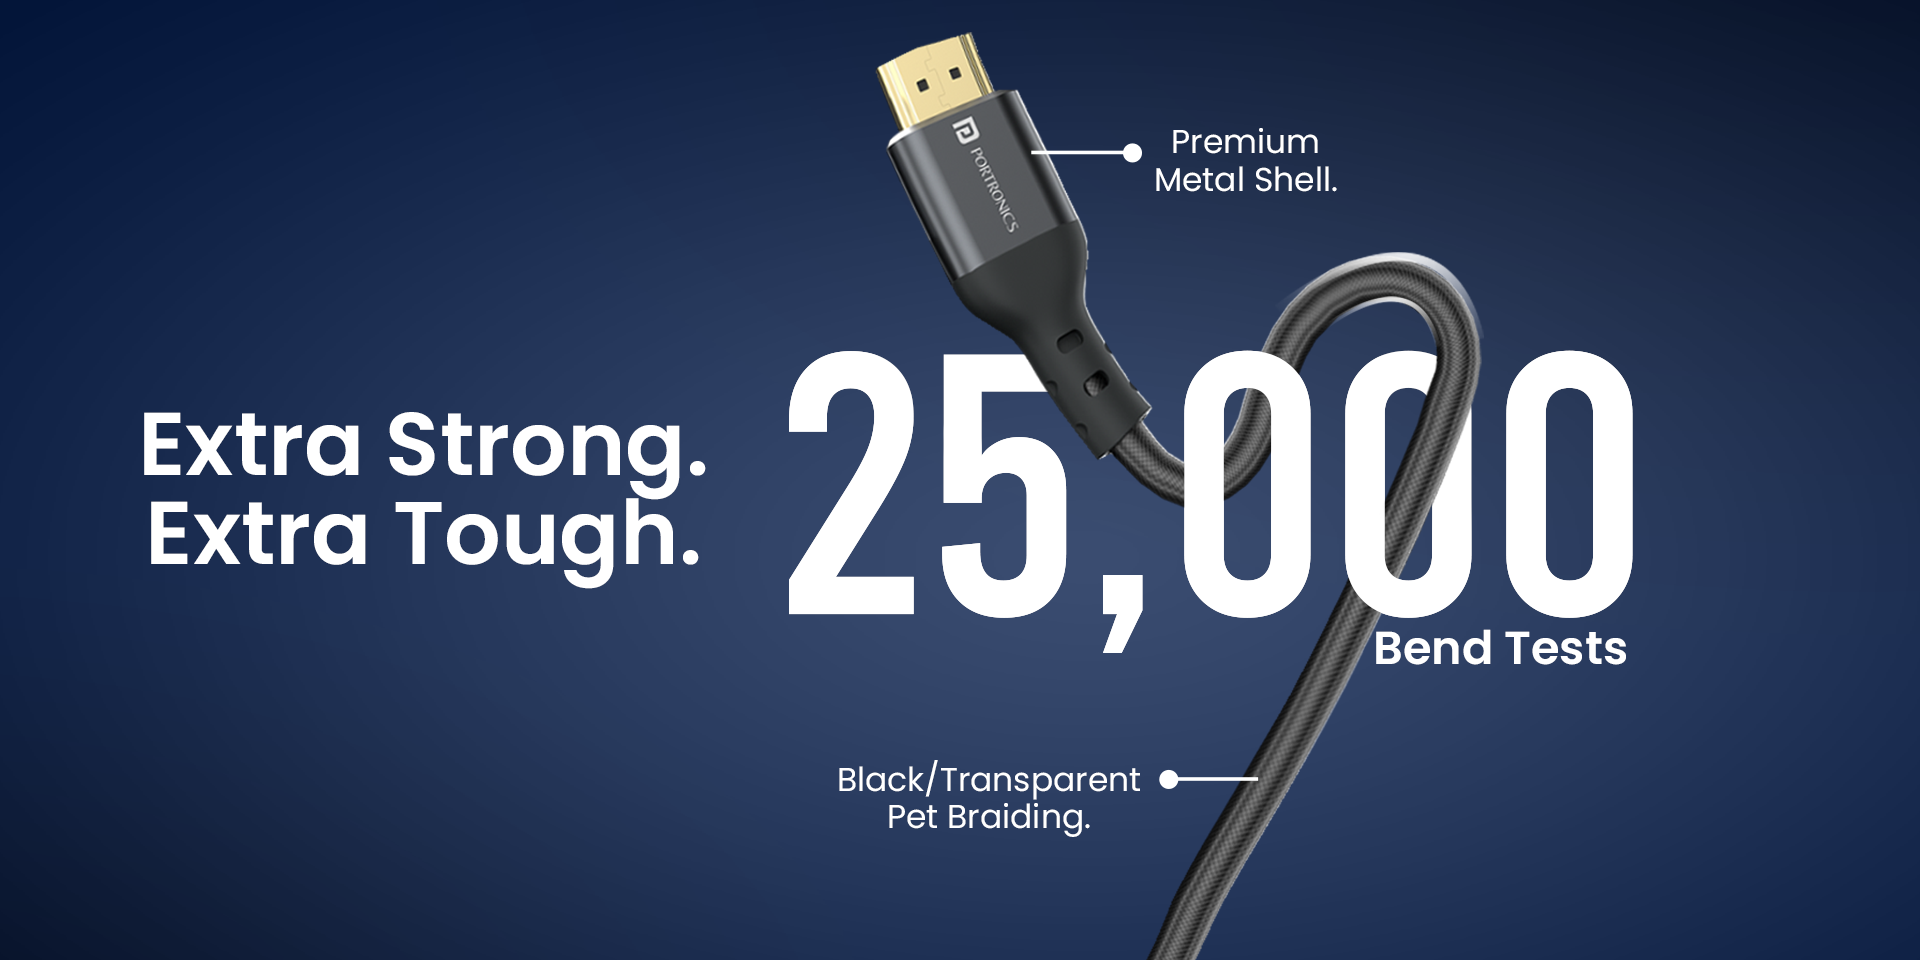 Portronics Konnect Stream 1.5M 4k hdmi to Hdmi cable with 25000 bend test for extra tough